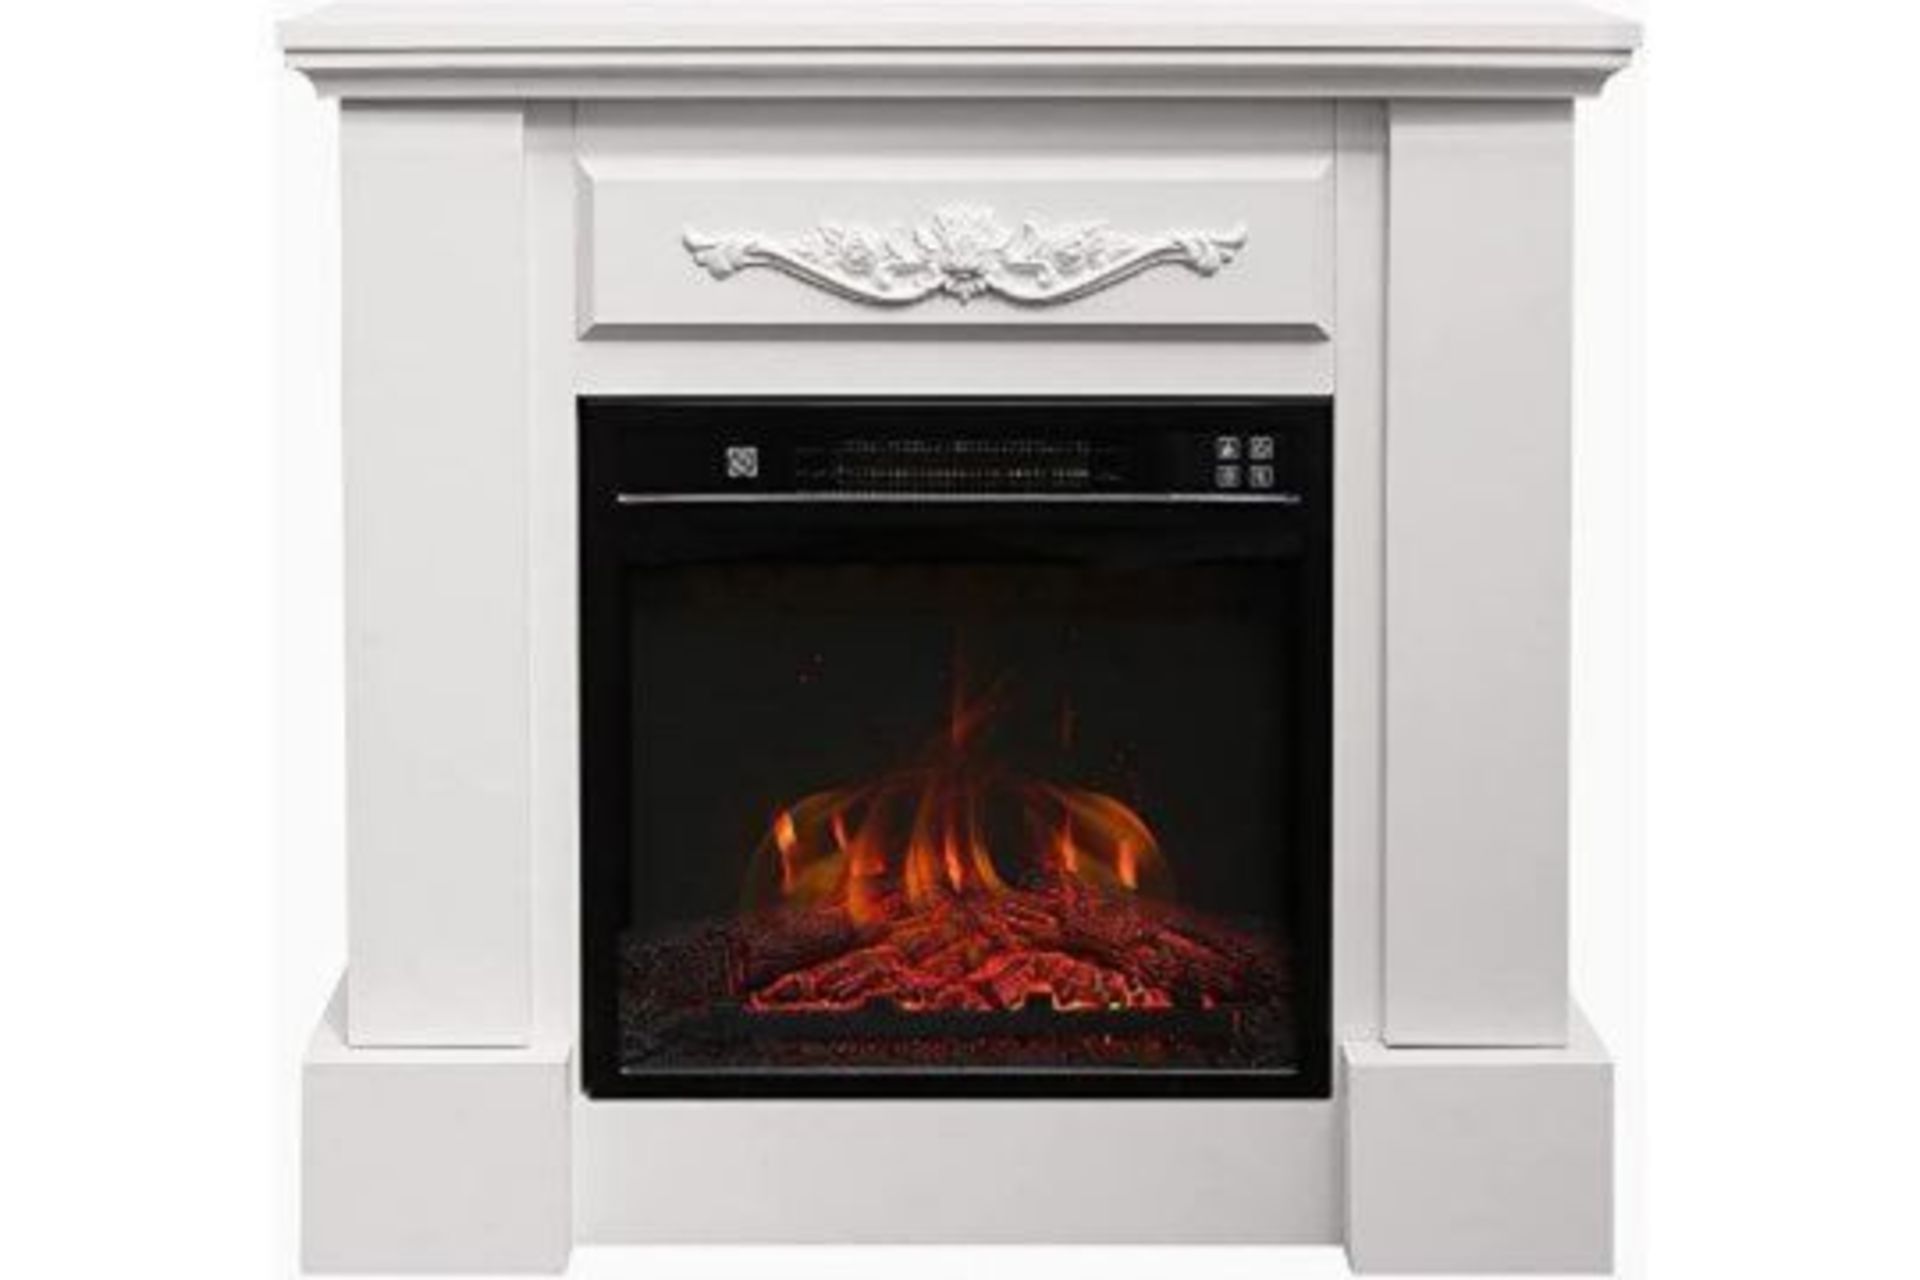 BRAND NEW ELECTRIC FIRE WITH LOG BURNER EFFECT, WITH FIRE SURROUND 17-27 DEGREES THERMOSTAT,